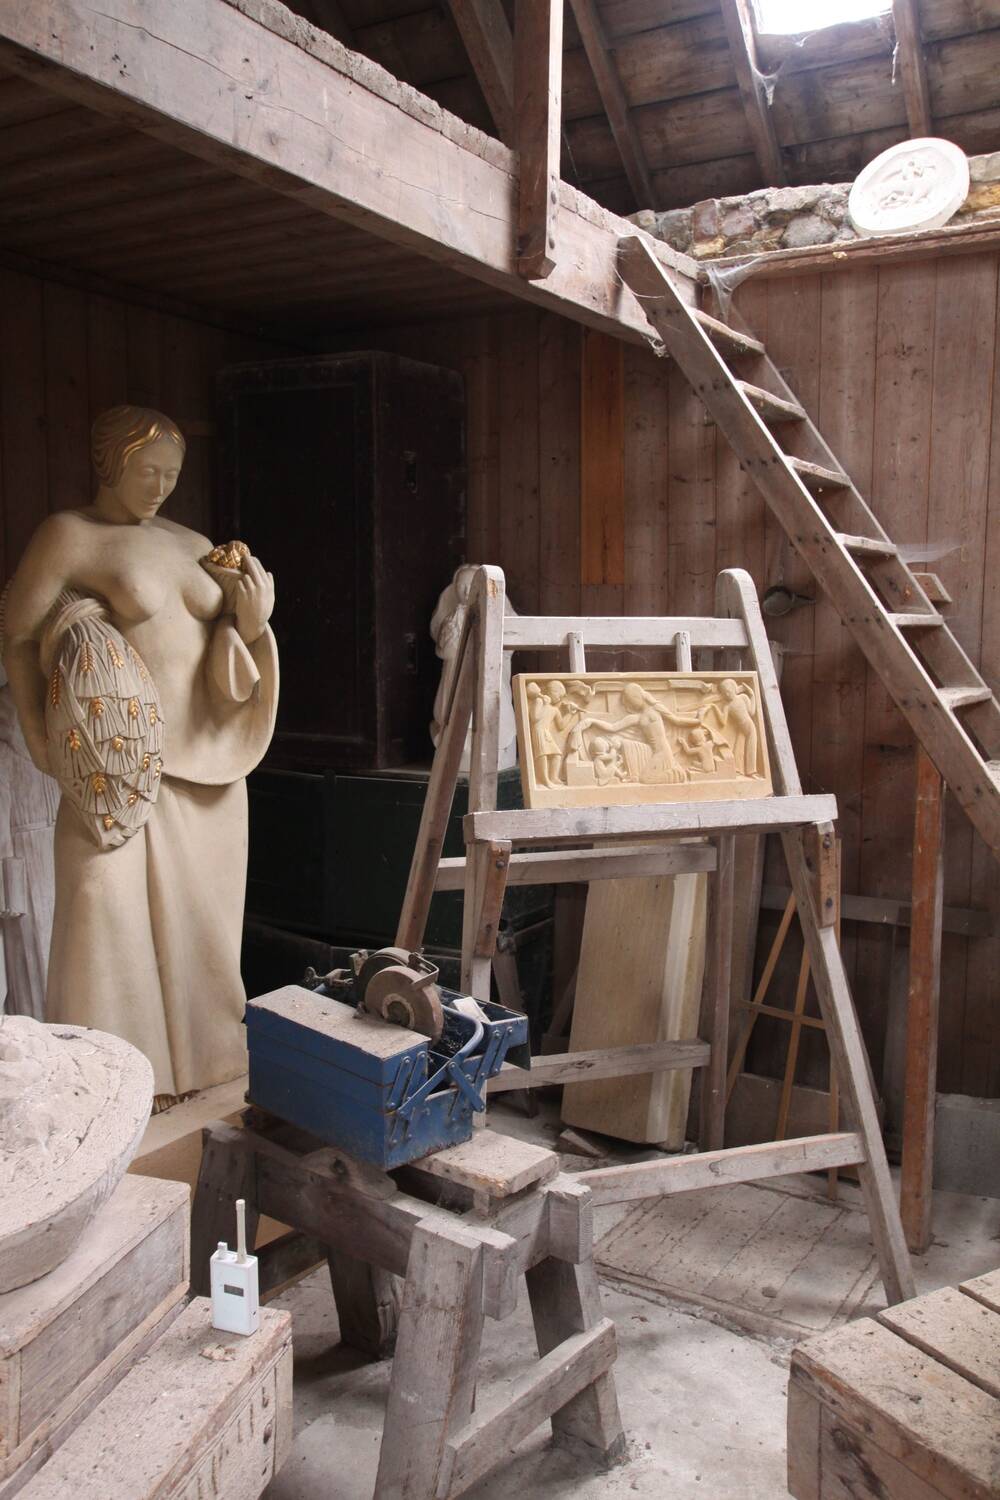 A view of an artist's sculpture studio, with a ladder leading up to a wooden loft area above. A tall statue of a woman with golden hair holding a sheaf of wheat stands in the corner. In the foreground are wooden steps, easels and a blue toolbox.